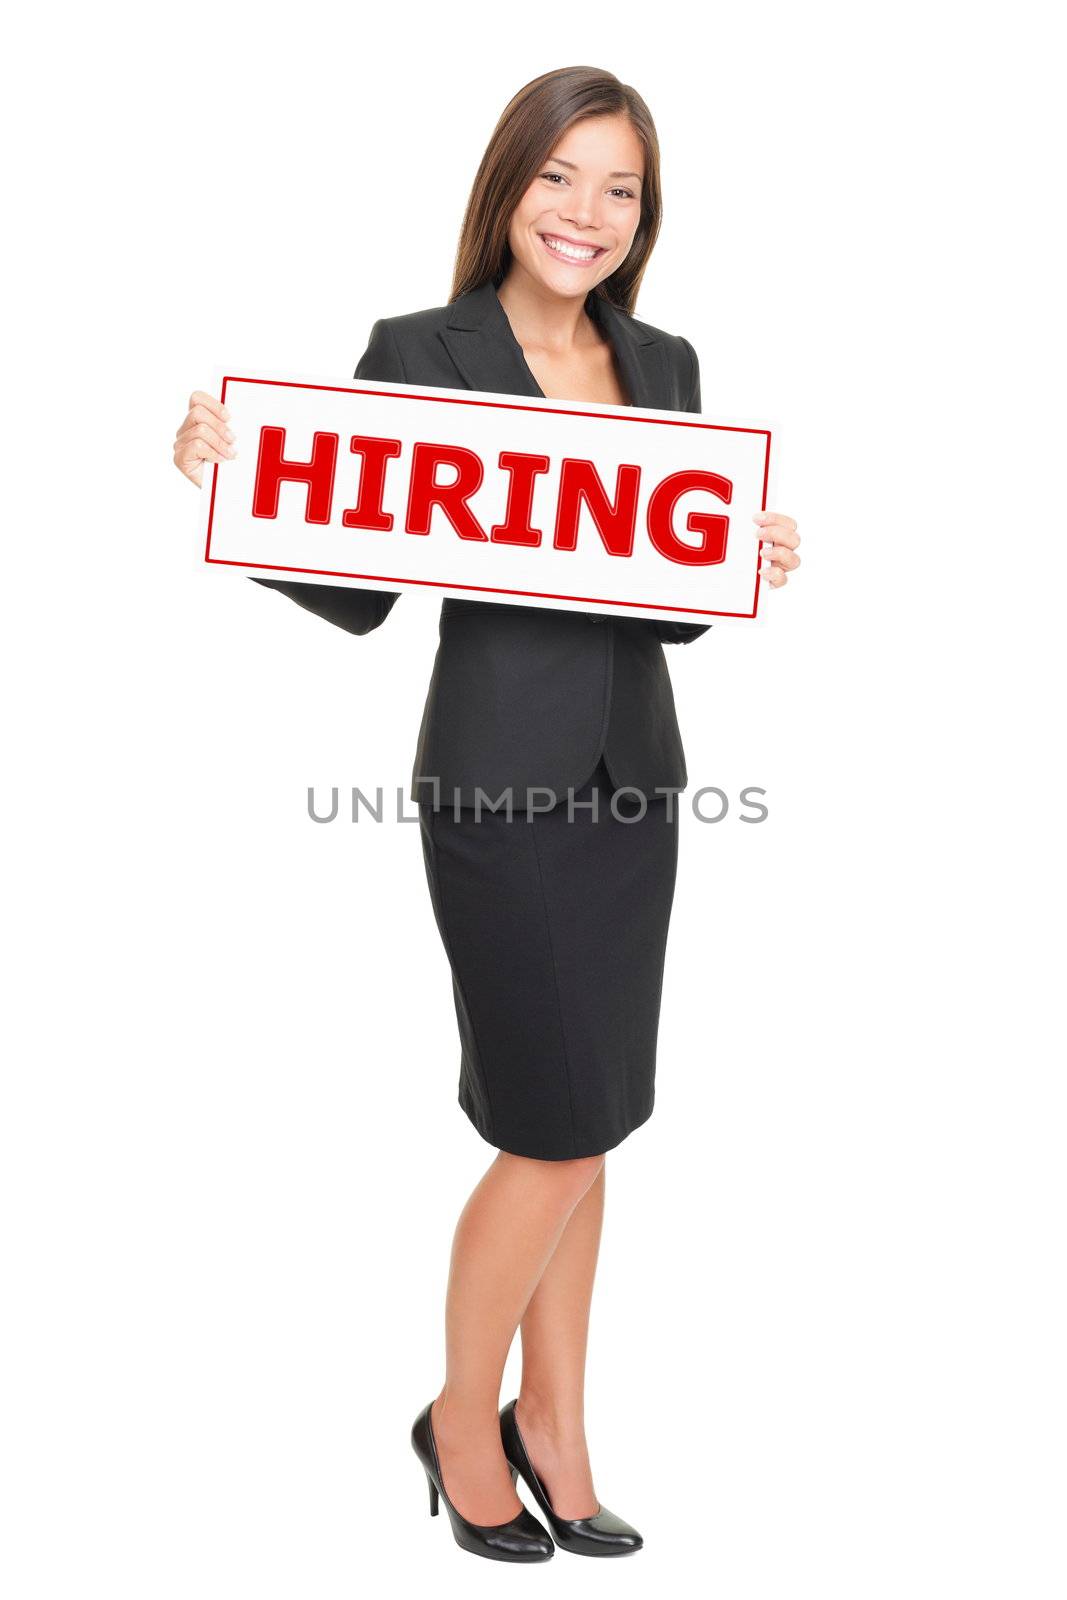 Hiring job woman holding hiring sign. Young attractive smiling Caucasian / Asian businesswoman isolated on white background.